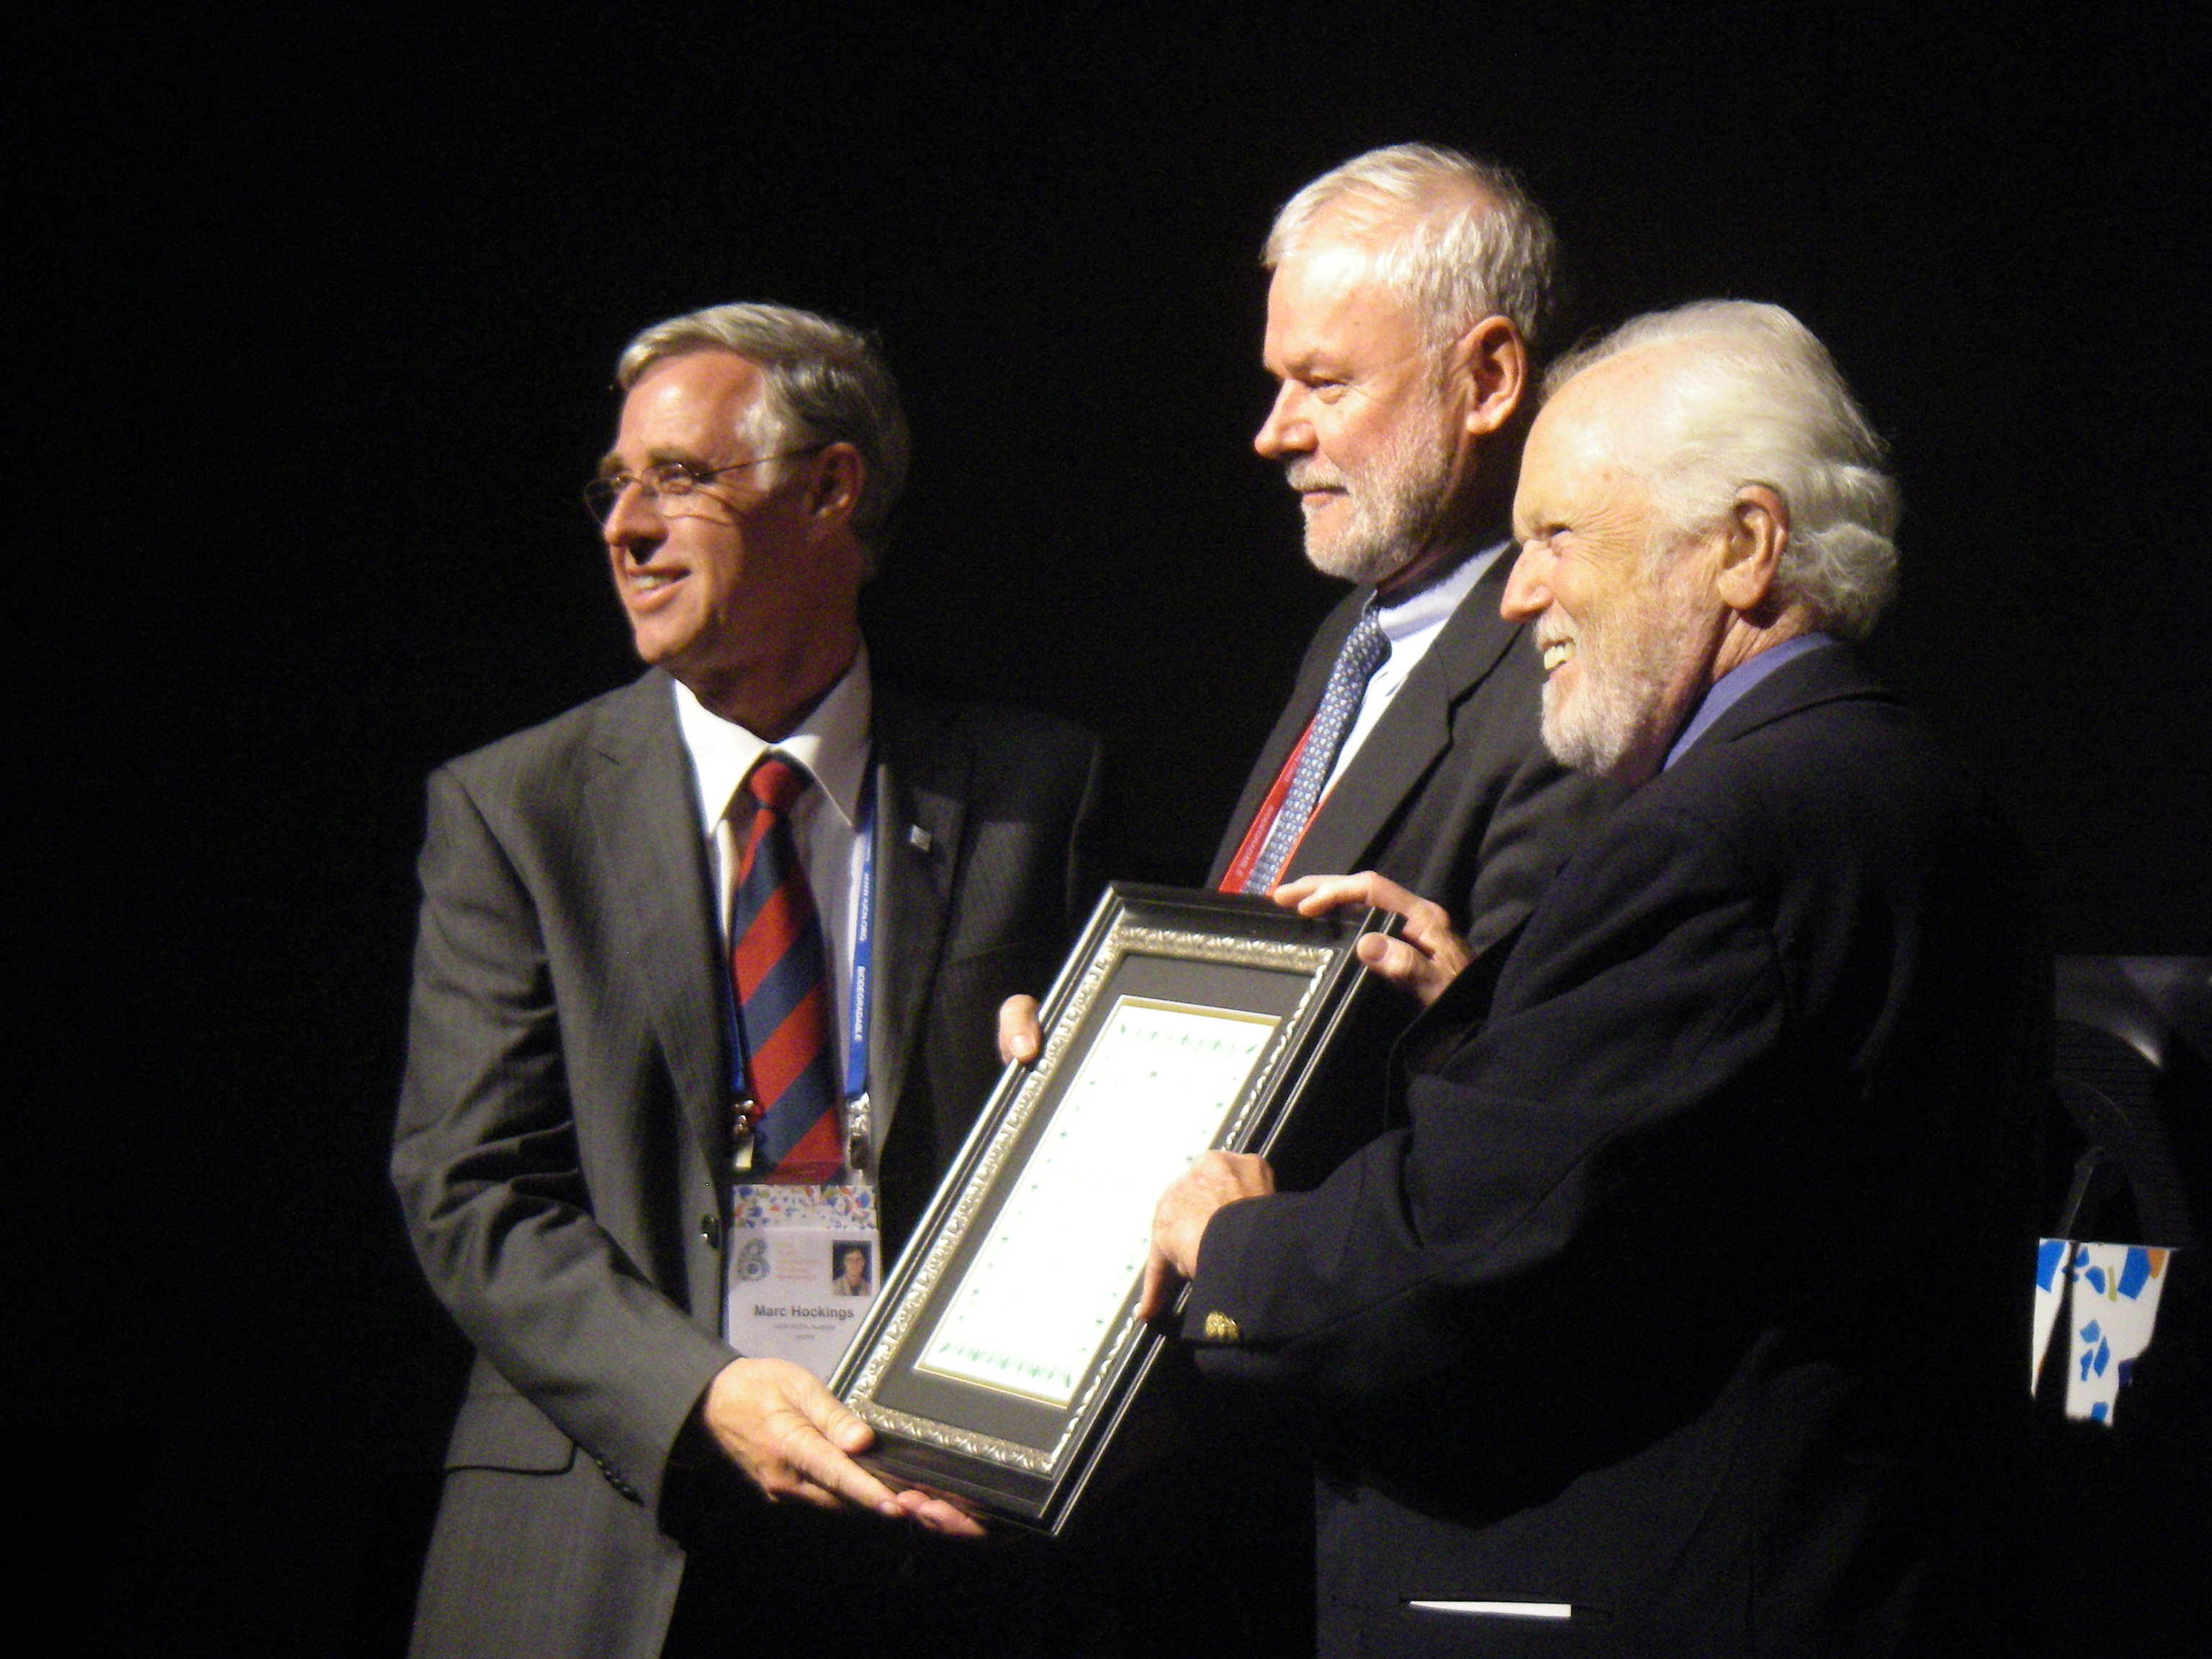 Marc Hockings, Awardee 2008, Nik Lopoukhine, WCPA Chair and Kenton Miller, former IUCN Director General, WCPA Chair and currently founder of the Kenton Miller Award. October 6th 2008, Barcelona, Spain